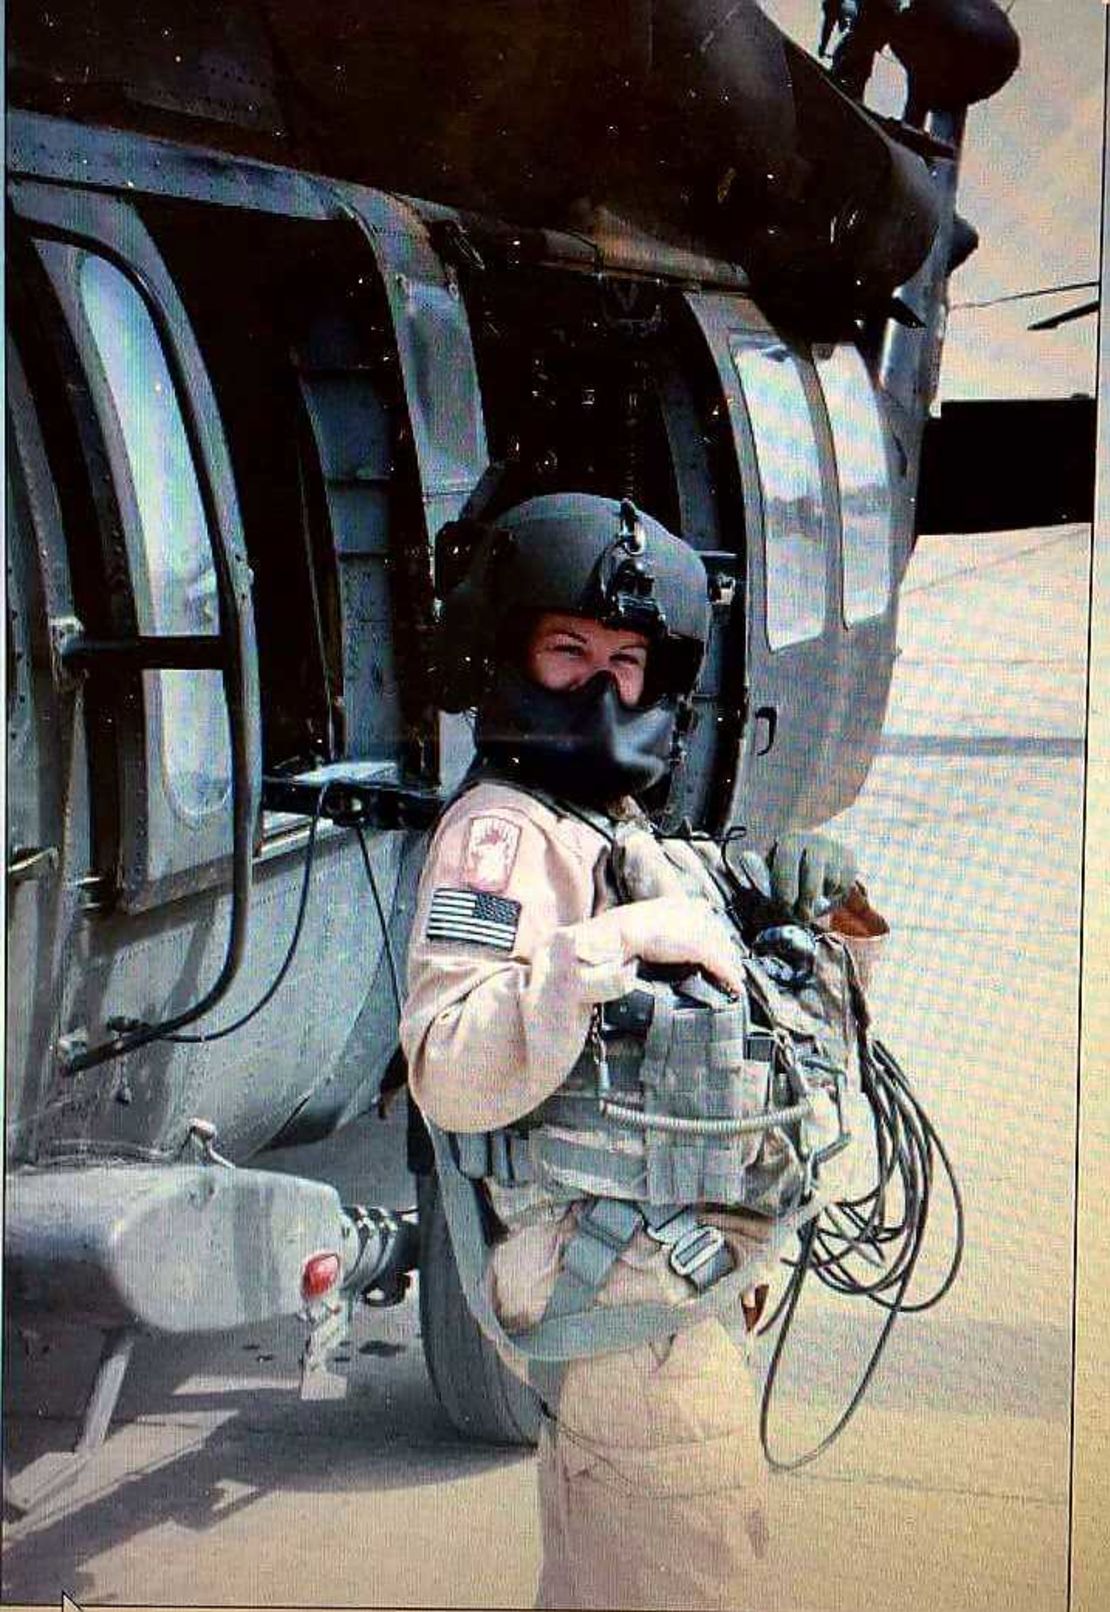 Harmony Allen with a Black Hawk helicopter during her Army training in 1999 at Fort Benning in GA. Allen served in the Army before joining the Air Force in 2000. 